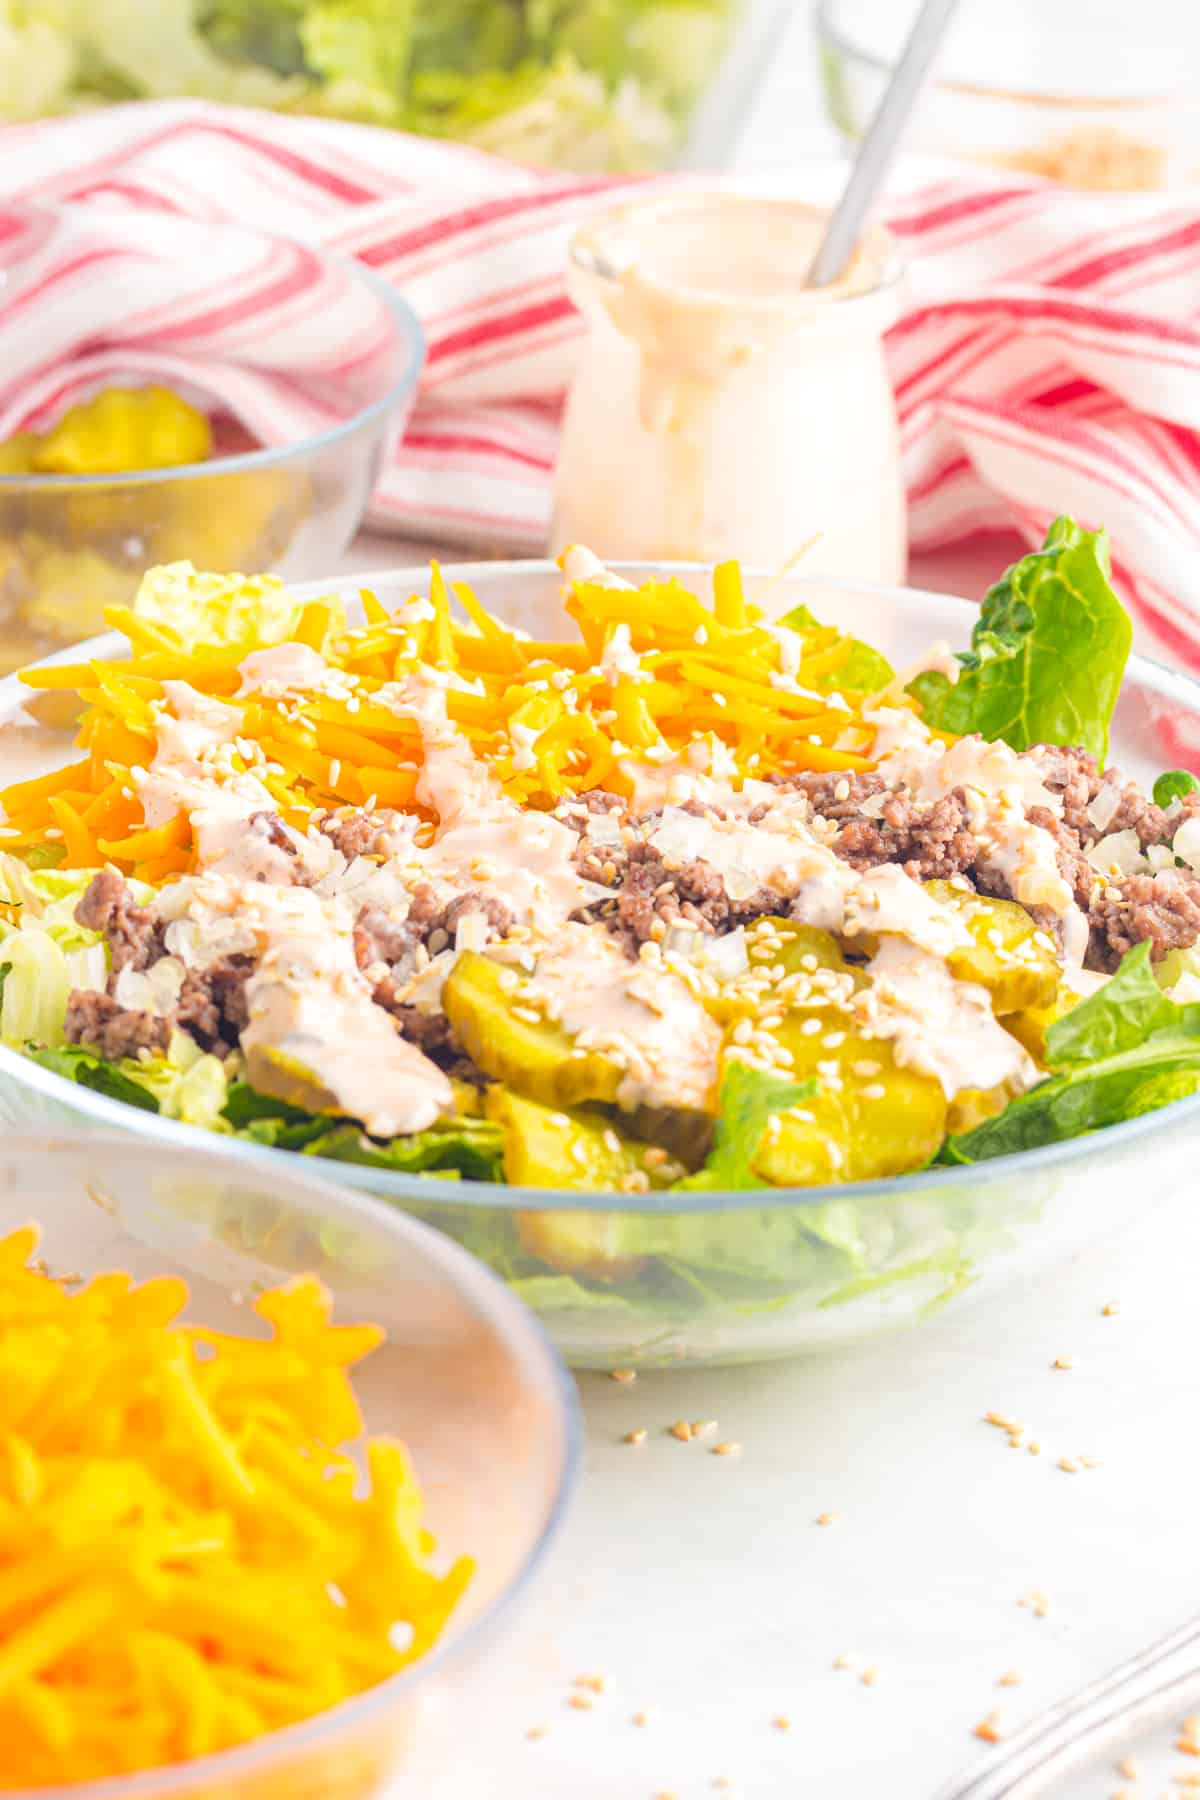 Salad on table with dressing.